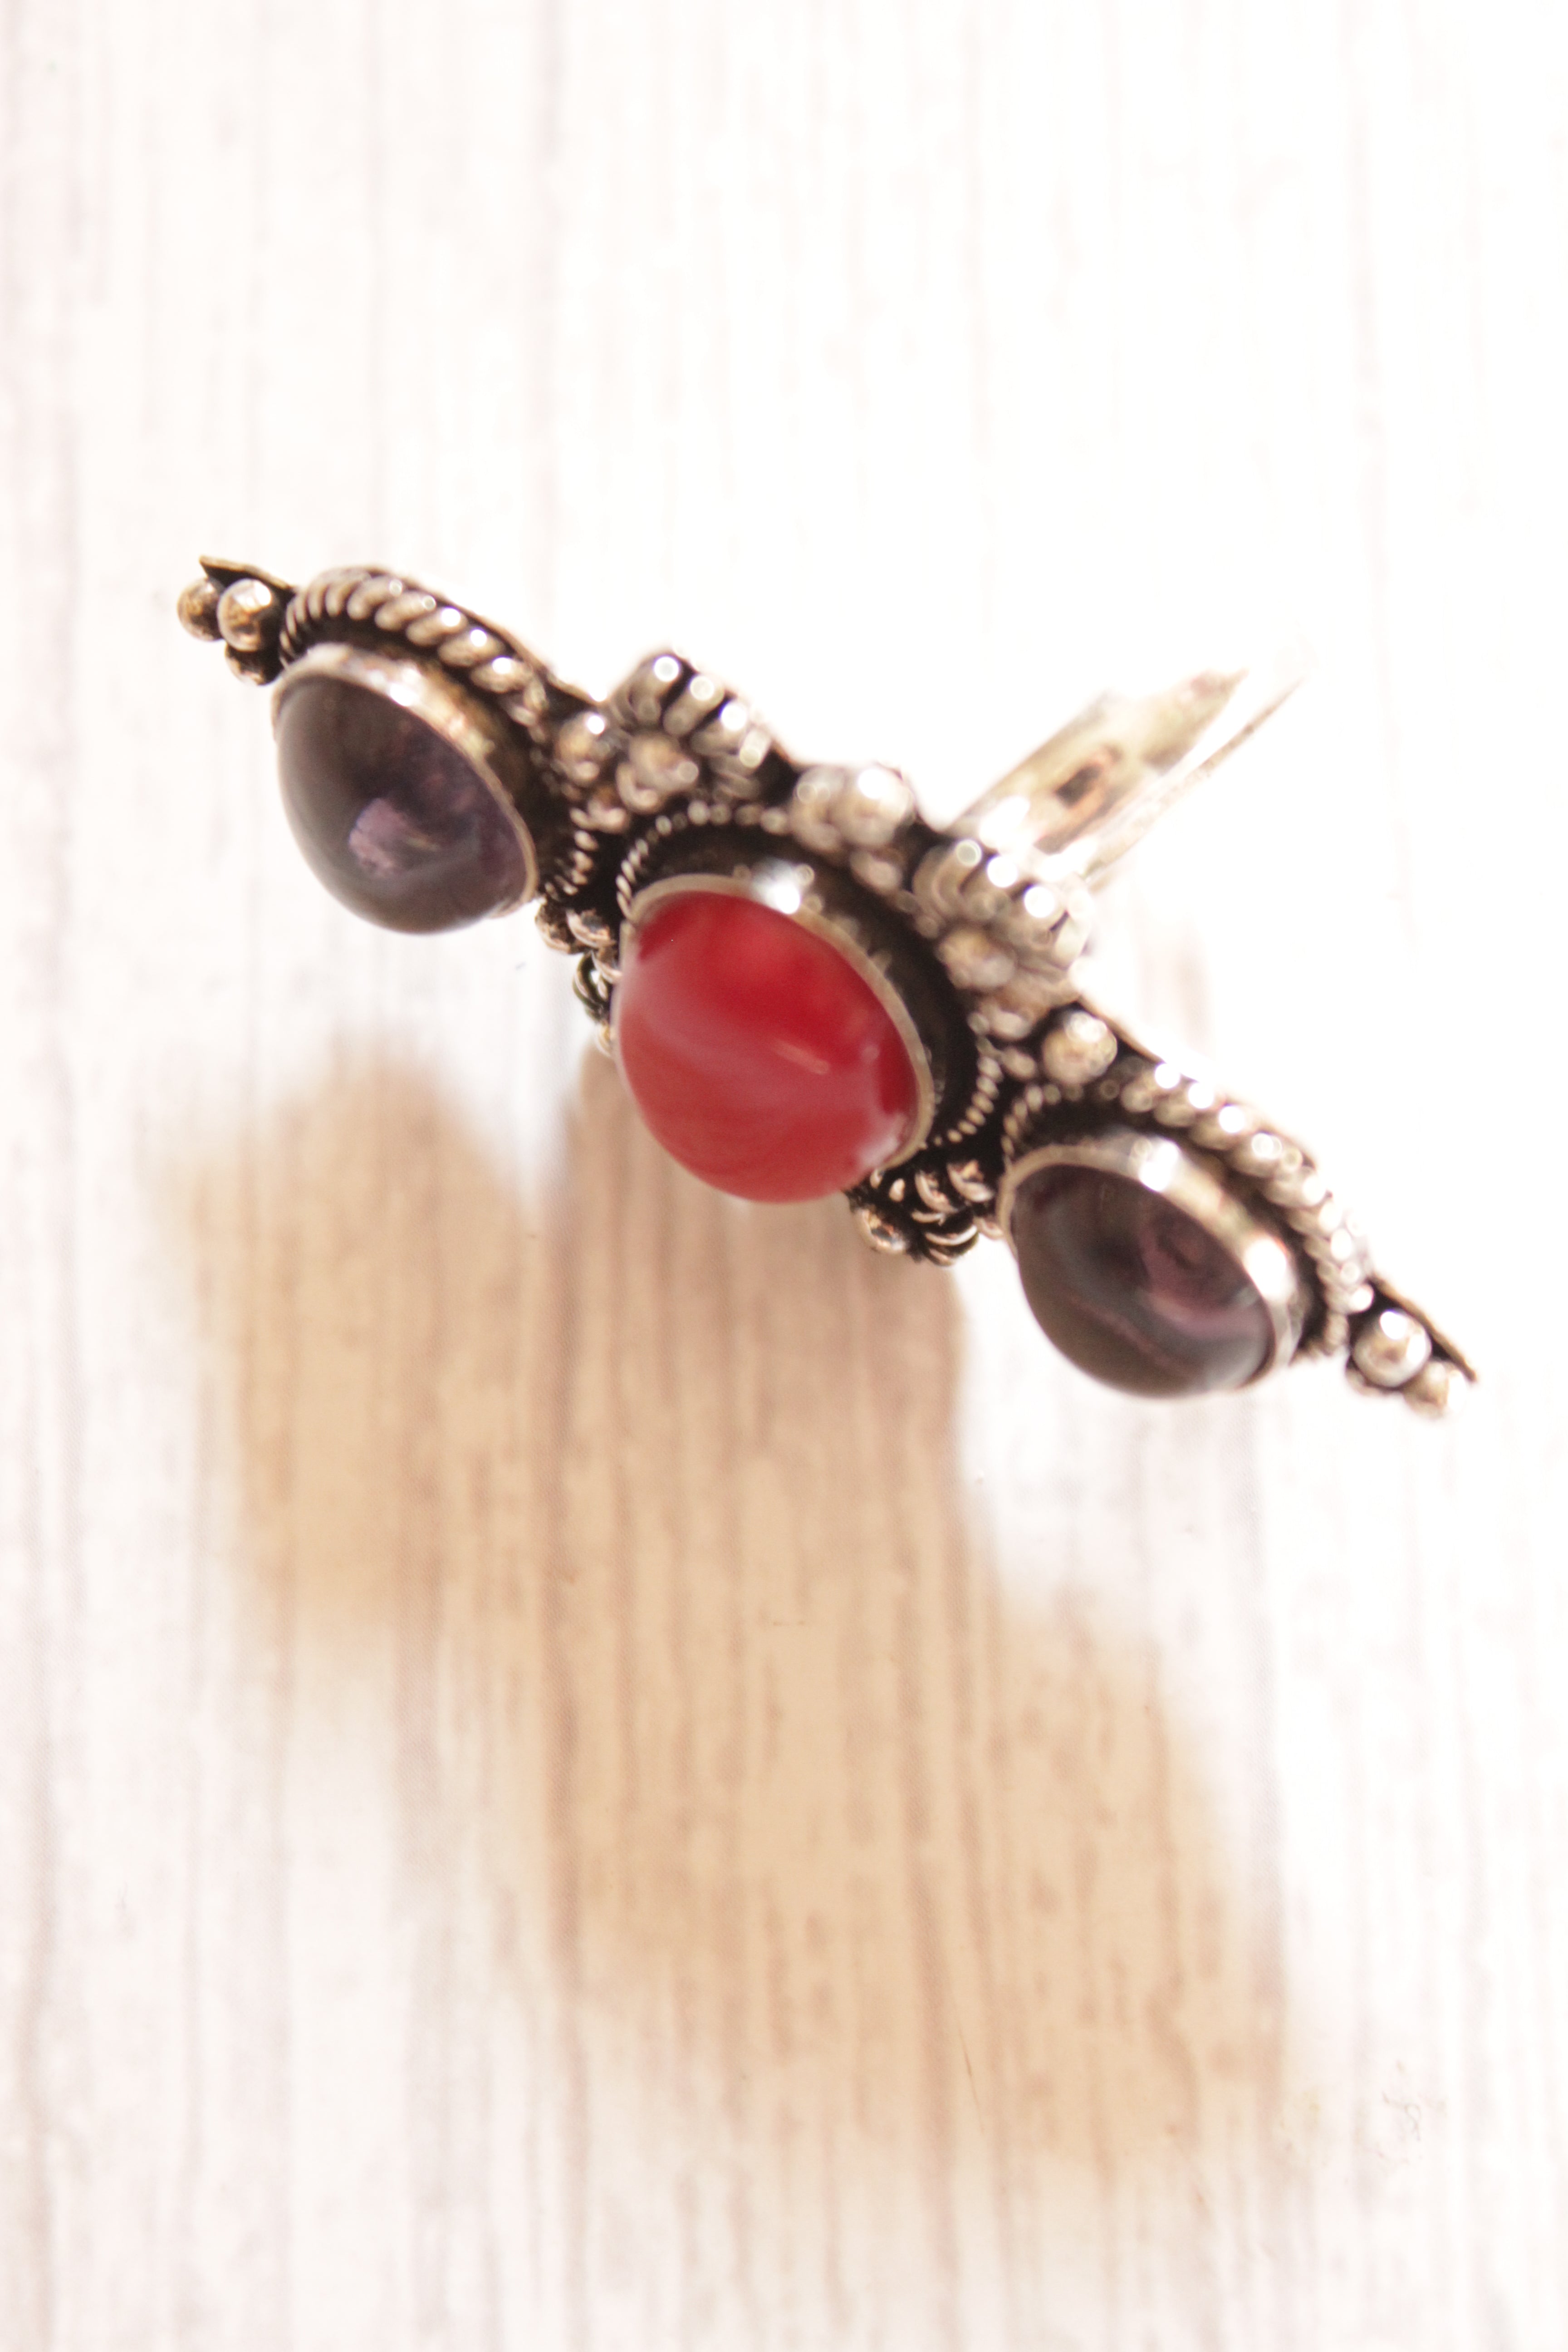 3 Red and Maroon Natural Gemstones Embedded Oxidised Finish Silver Ring